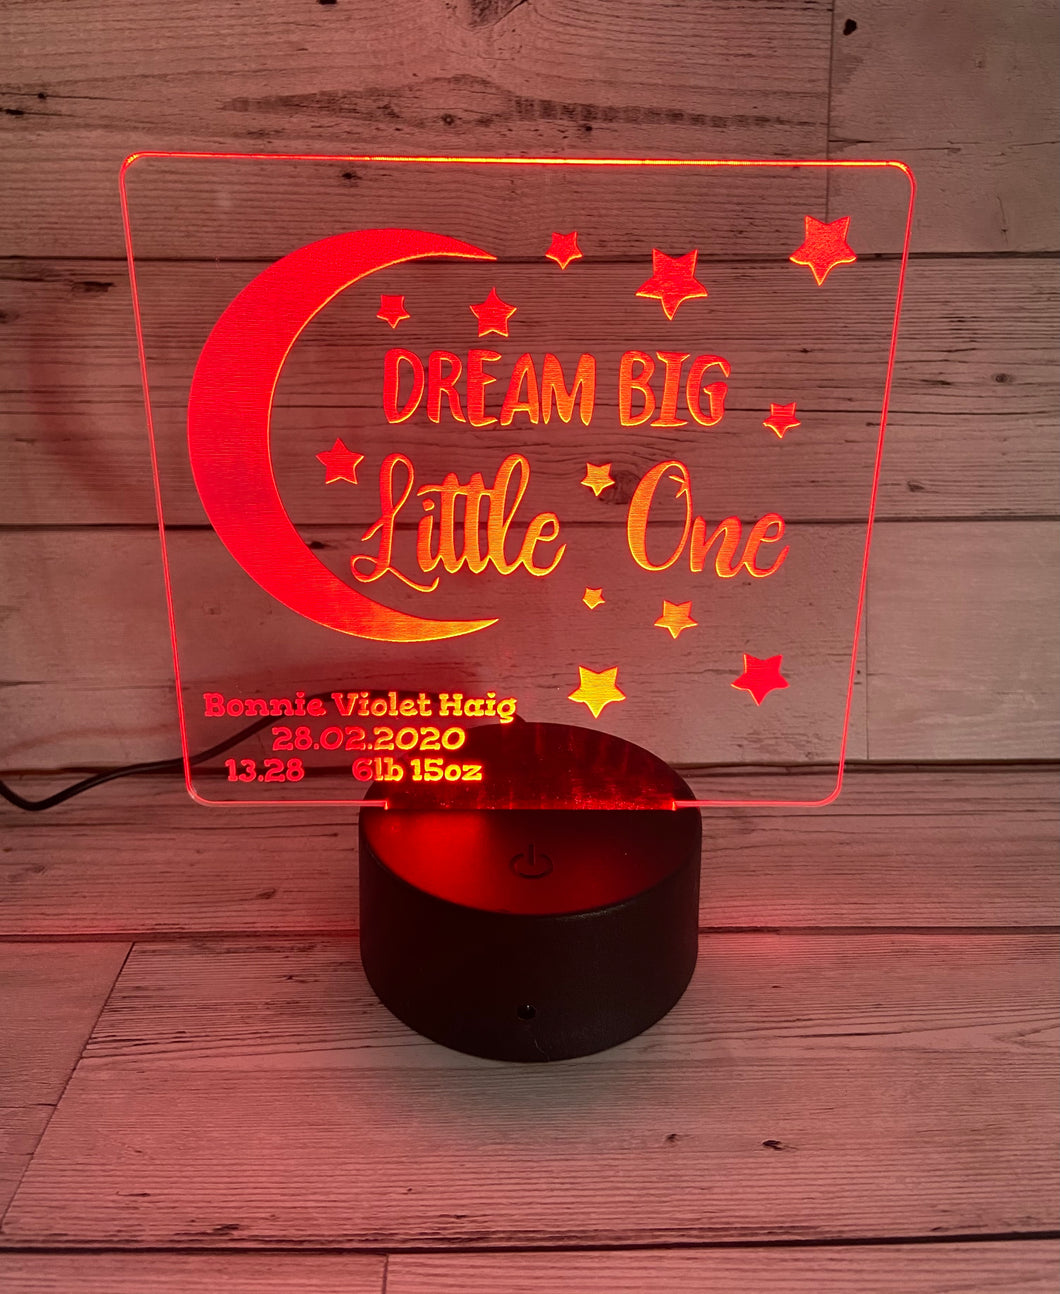 New baby 'Dream big little one' led light up display - 9 colours options with remote! - Laser LLama Designs Ltd